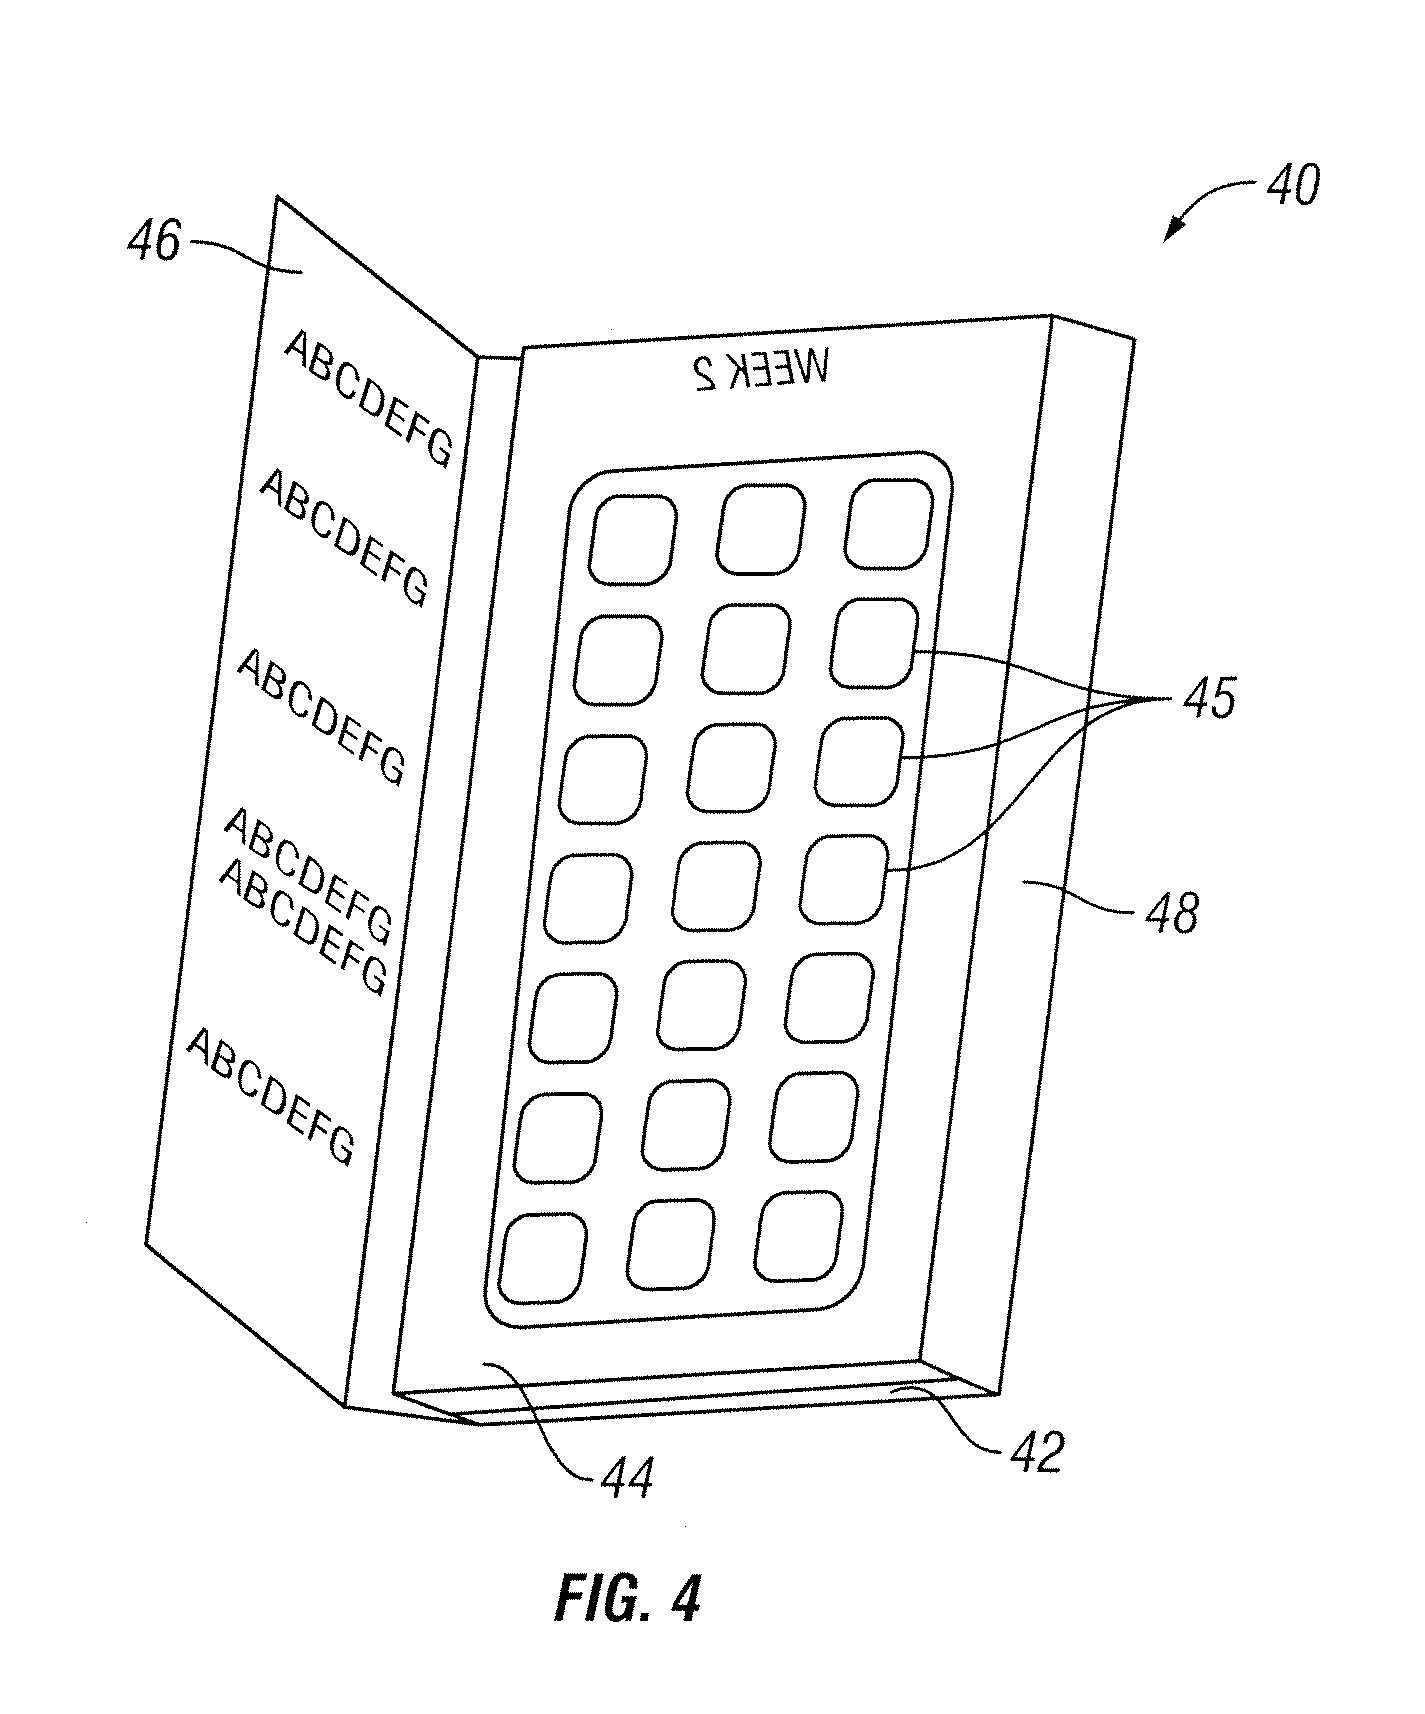 Method of providing pirfenidone therapy to a patient